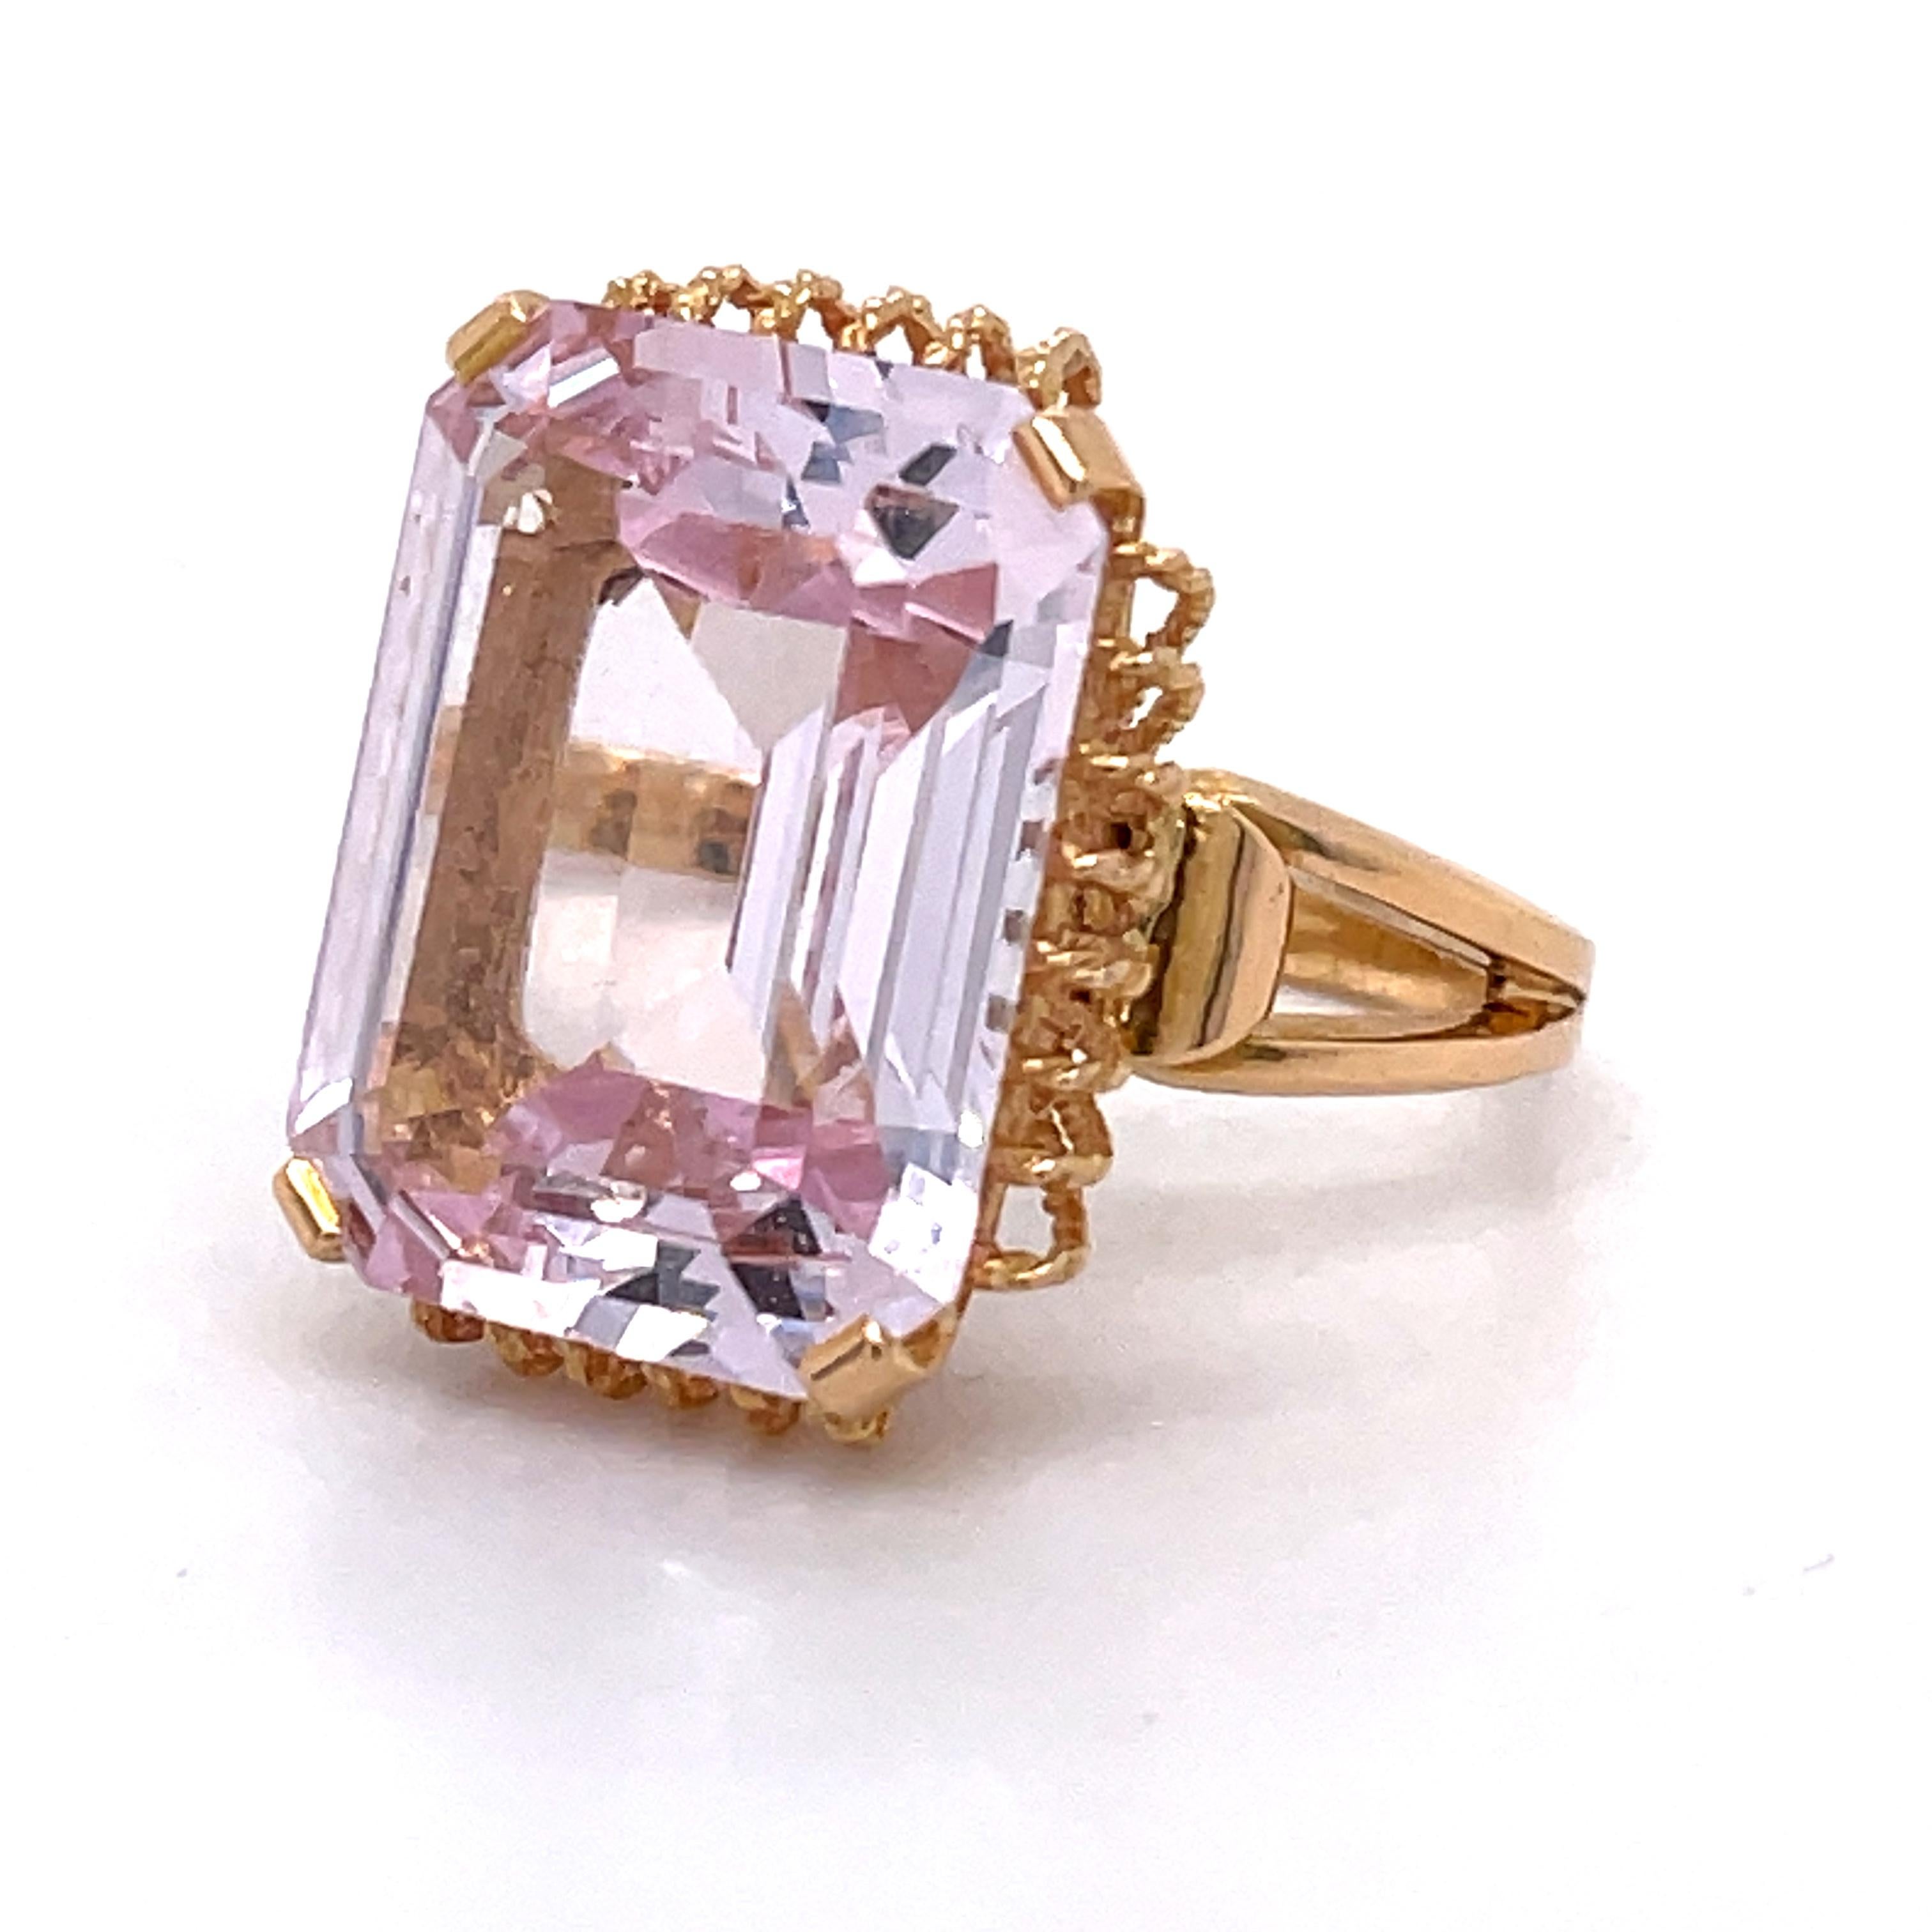 GWLAB Certified, 16.23ct Pink Spinel Emerald Cut, 14k Rose Gold, Cocktail Ring For Sale 4